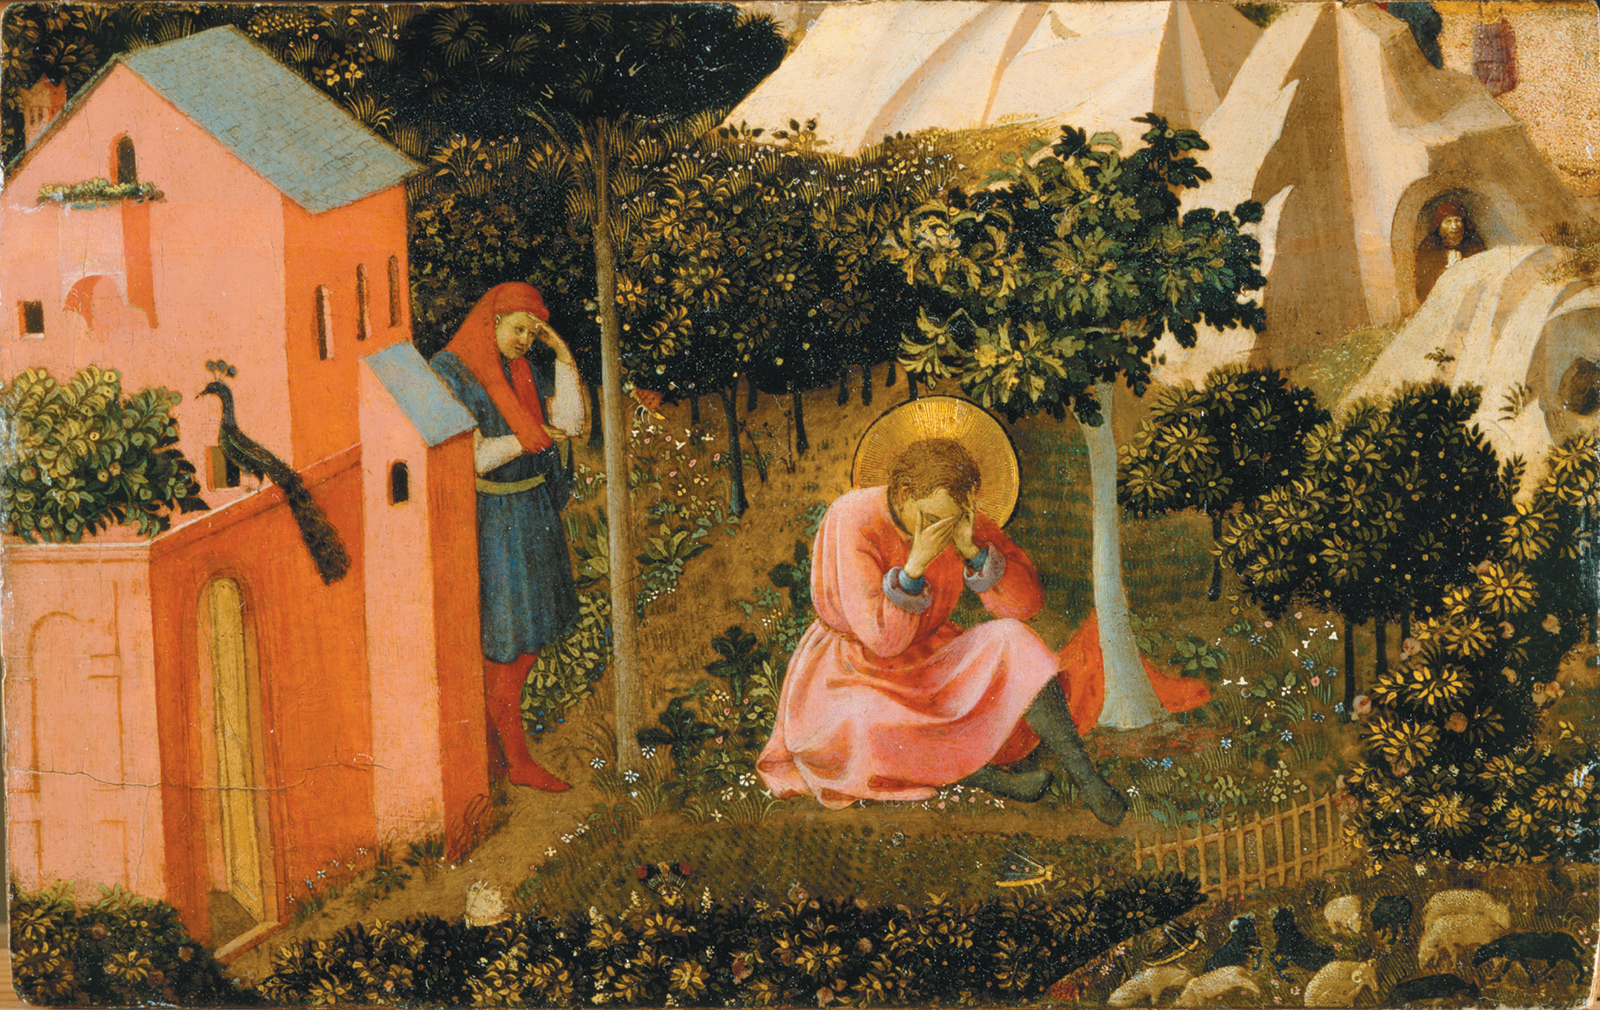 Fra Angelico: The Conversion of Saint Augustine, circa 1430s